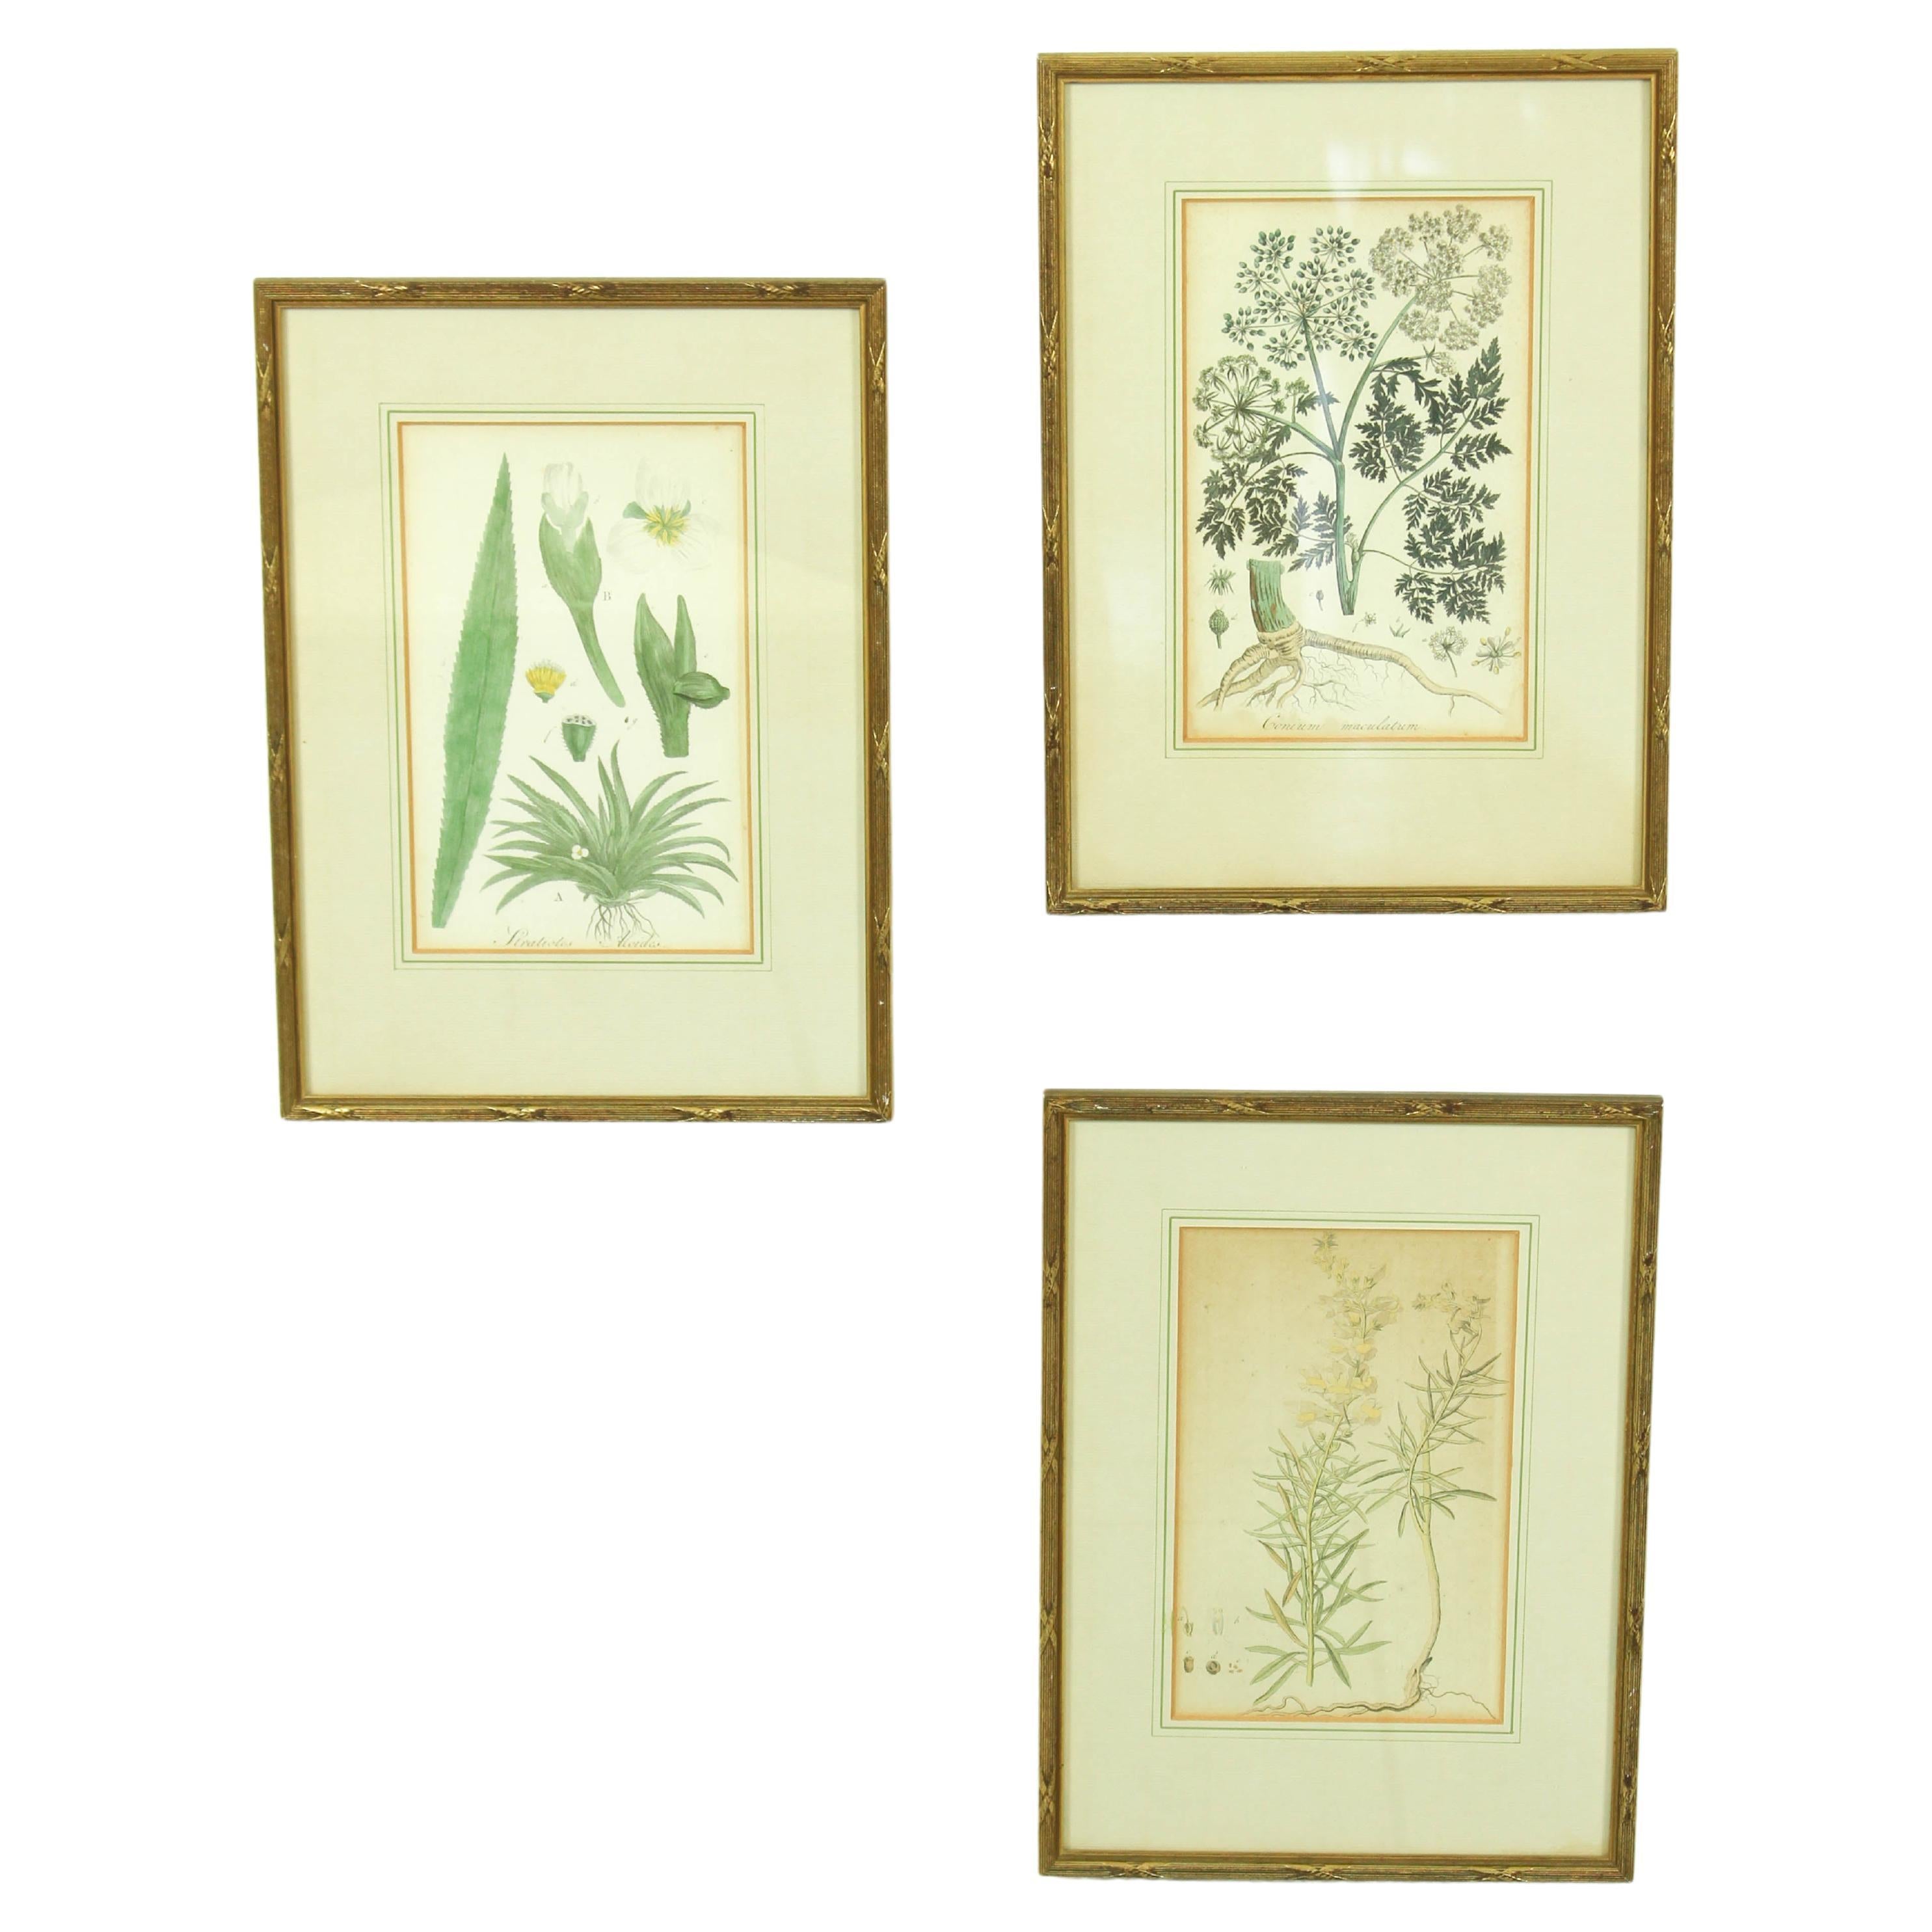 Set of 3 Copperplate Engravings from the Famous Book "Flora Batava, 1807"-1814 For Sale